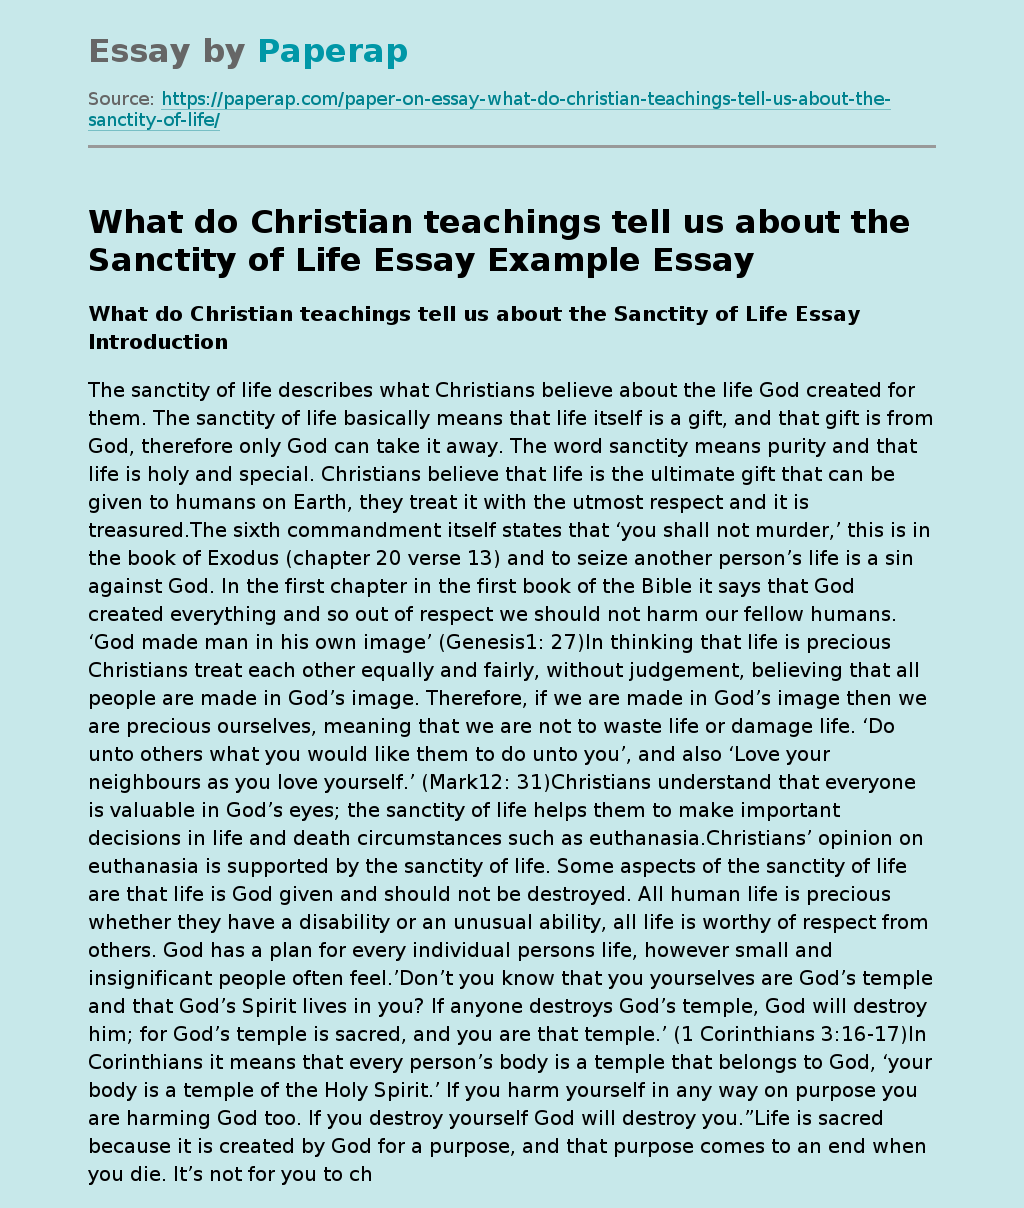 What do Christian teachings tell us about the Sanctity of Life Essay Example